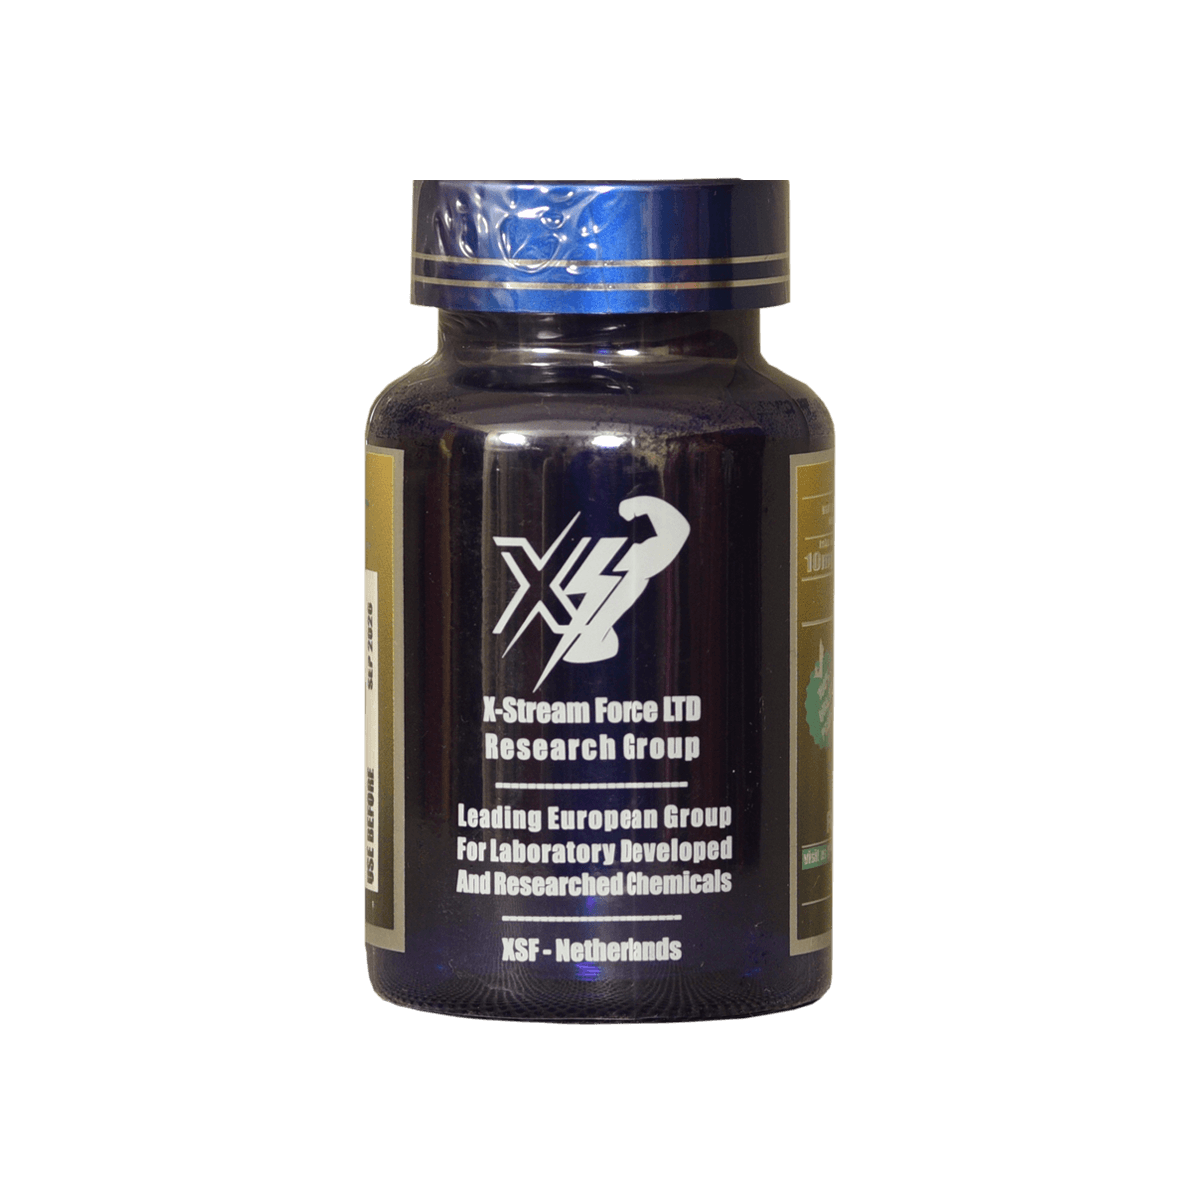 cardarine-gw155016-capsules-100-10mg-muscle shop-xstreamforce-for cardio-strength-fat cleaner-endurance✦gw501516sarms✦ fitness supplements | XSF Store